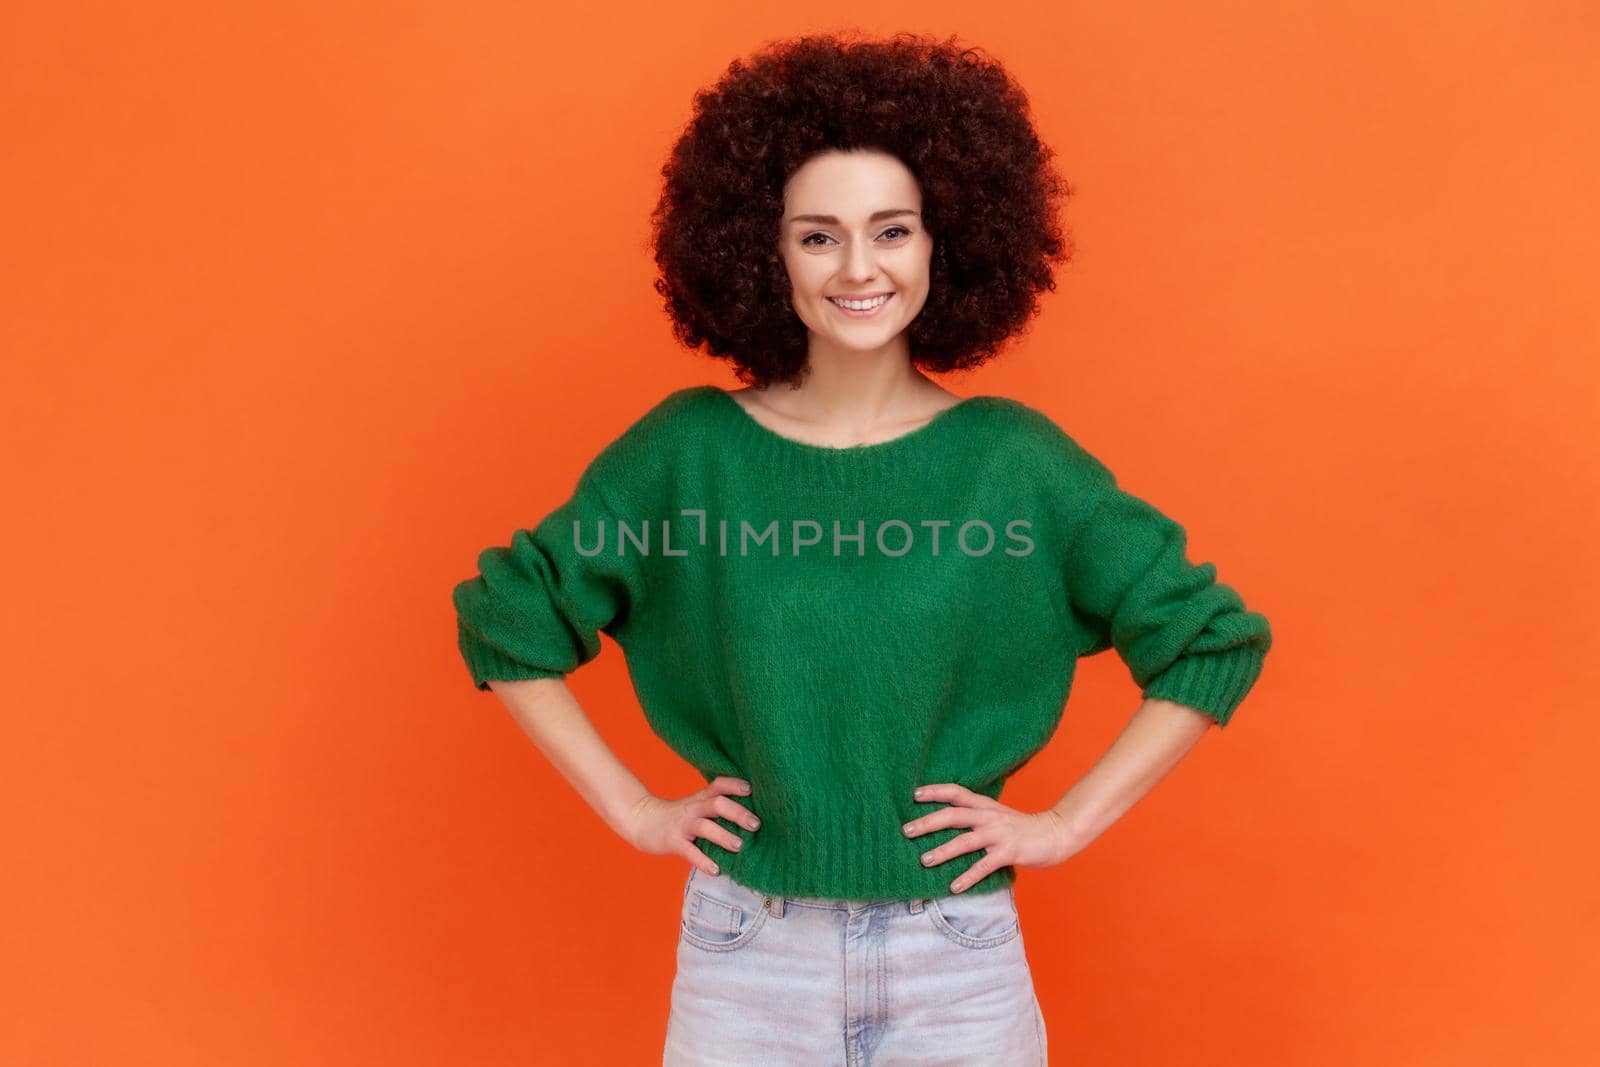 Good looking friendly confident woman with Afro hairstyle wearing green casual style sweater standing with hands on hips, smiling happily. Indoor studio shot isolated on orange background.